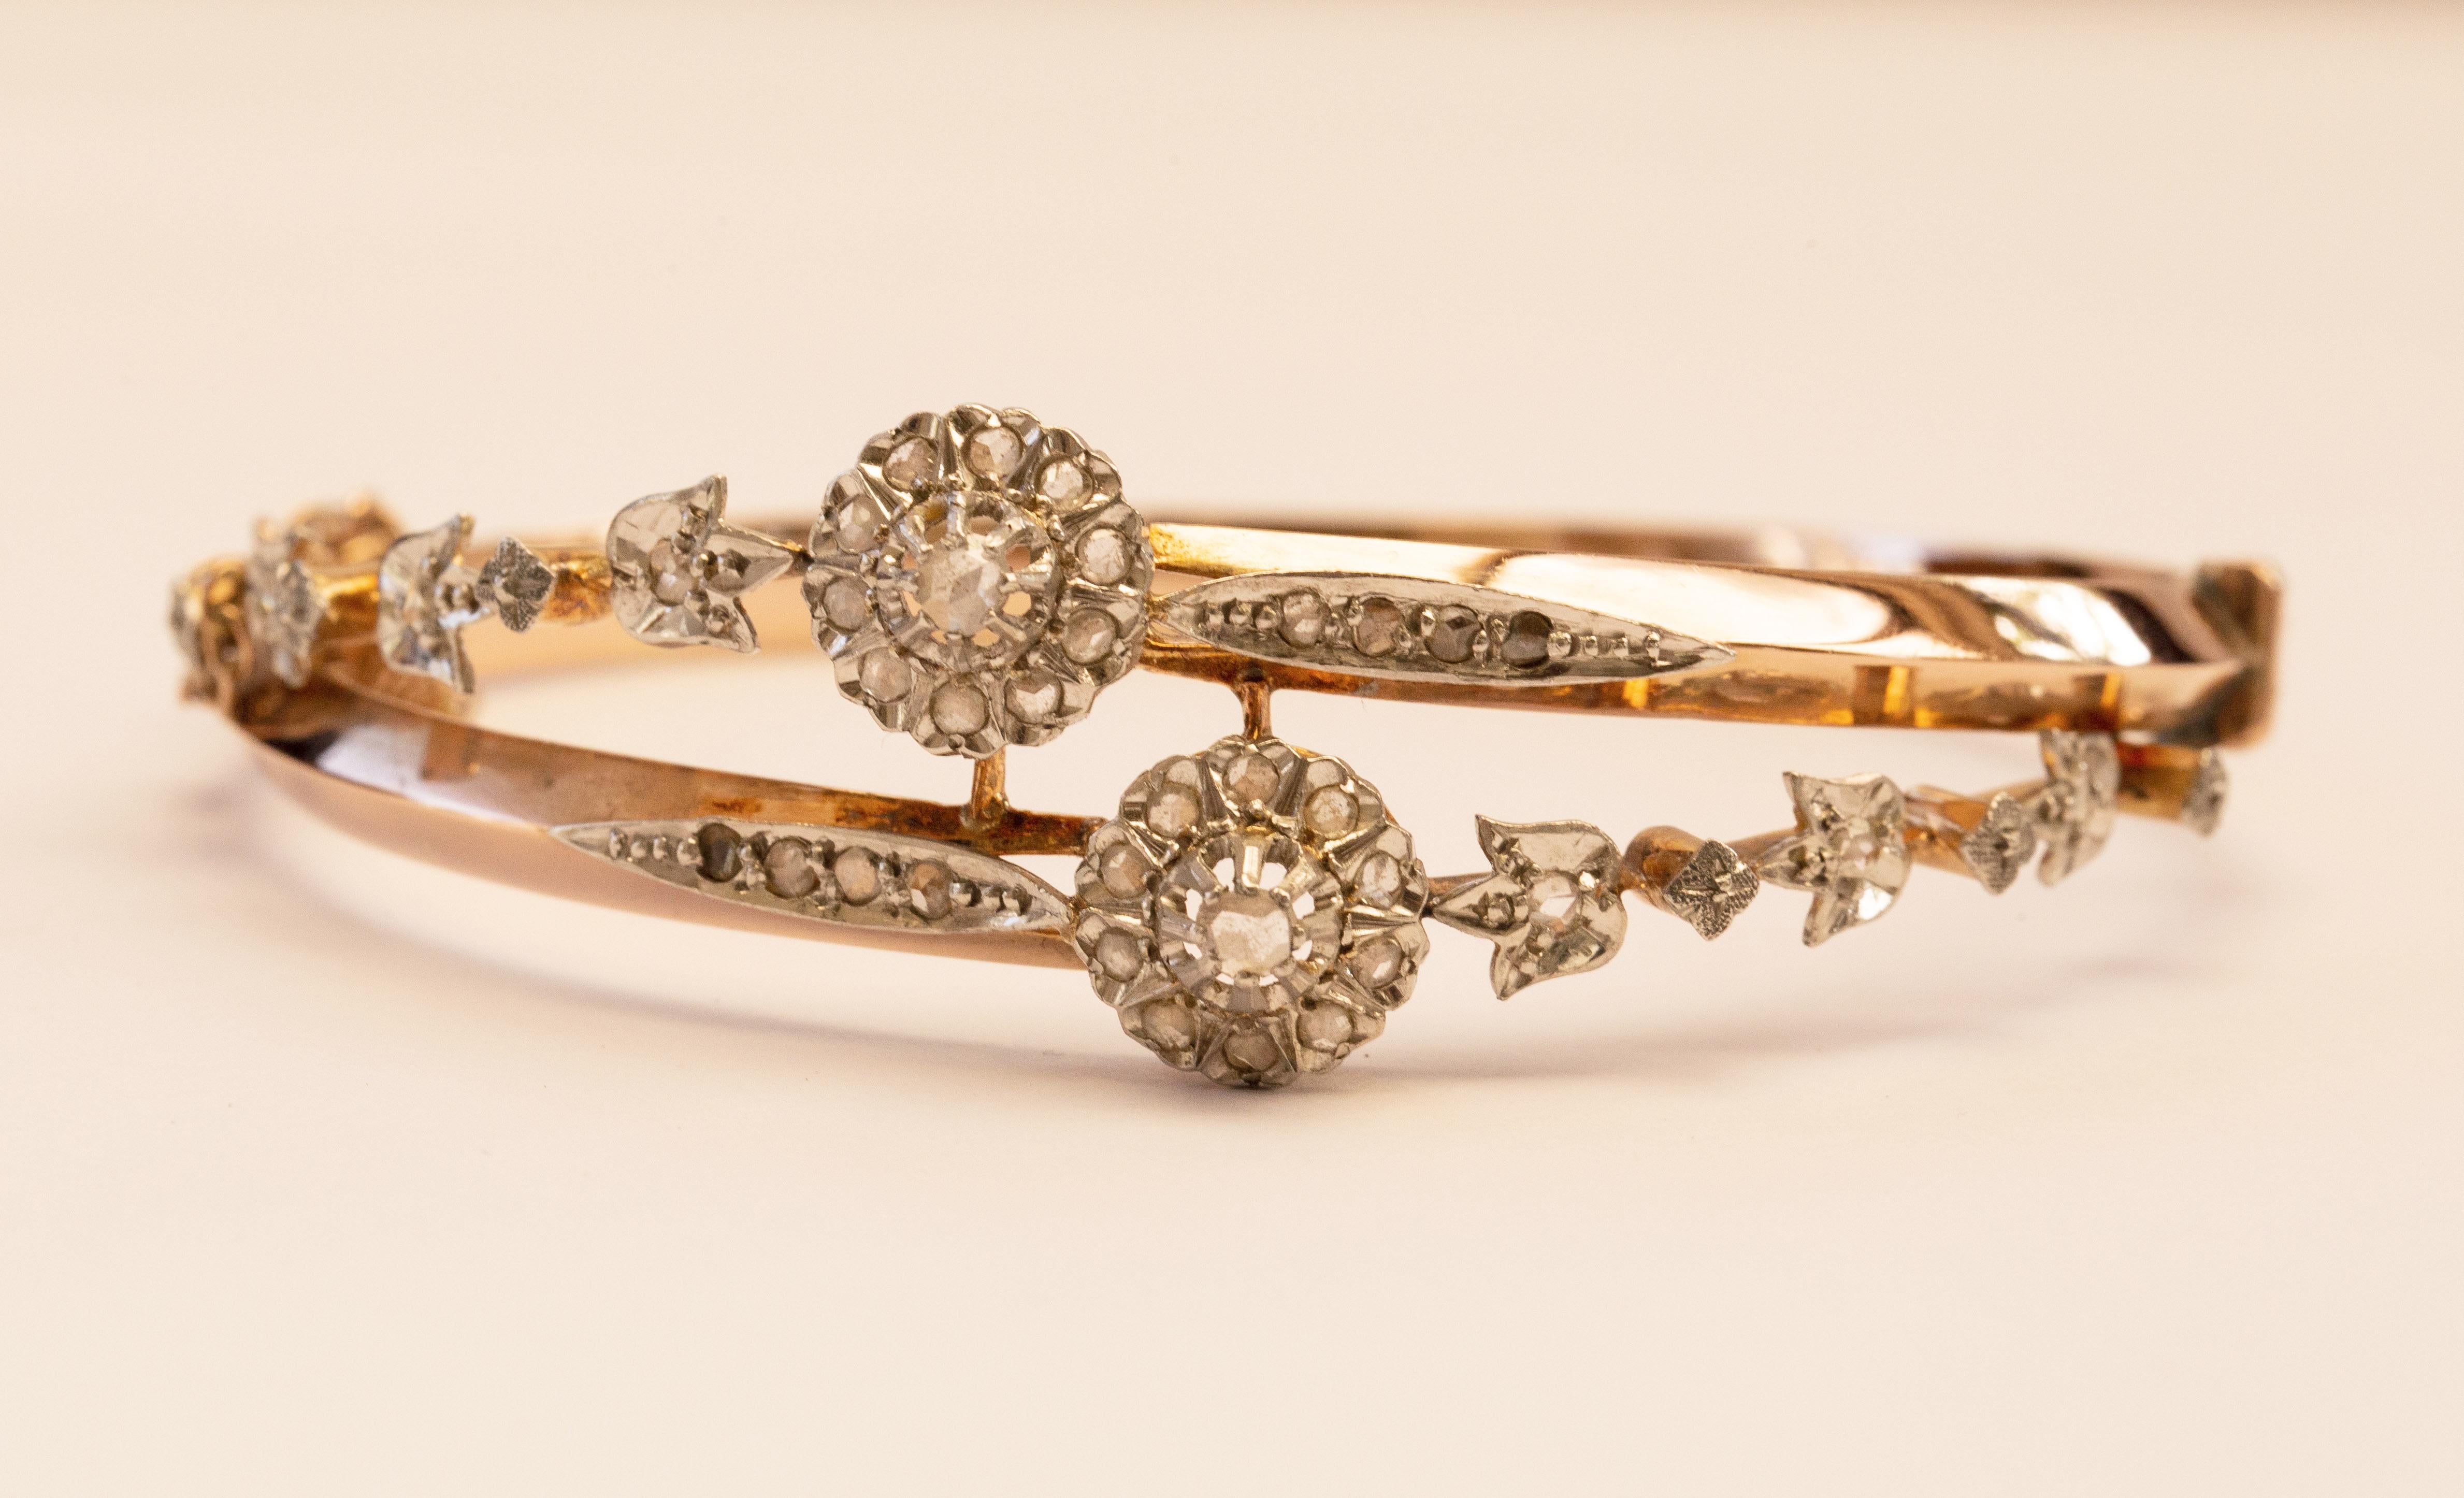 An antique 18 karat yellow gold bangle/rigid bracelet with 36 rose cut diamonds set in platinum manufactured circa 1900, most likely in France. The bracelet features floral decor. The bracelet is delicate, yet eye catching and it would be a great